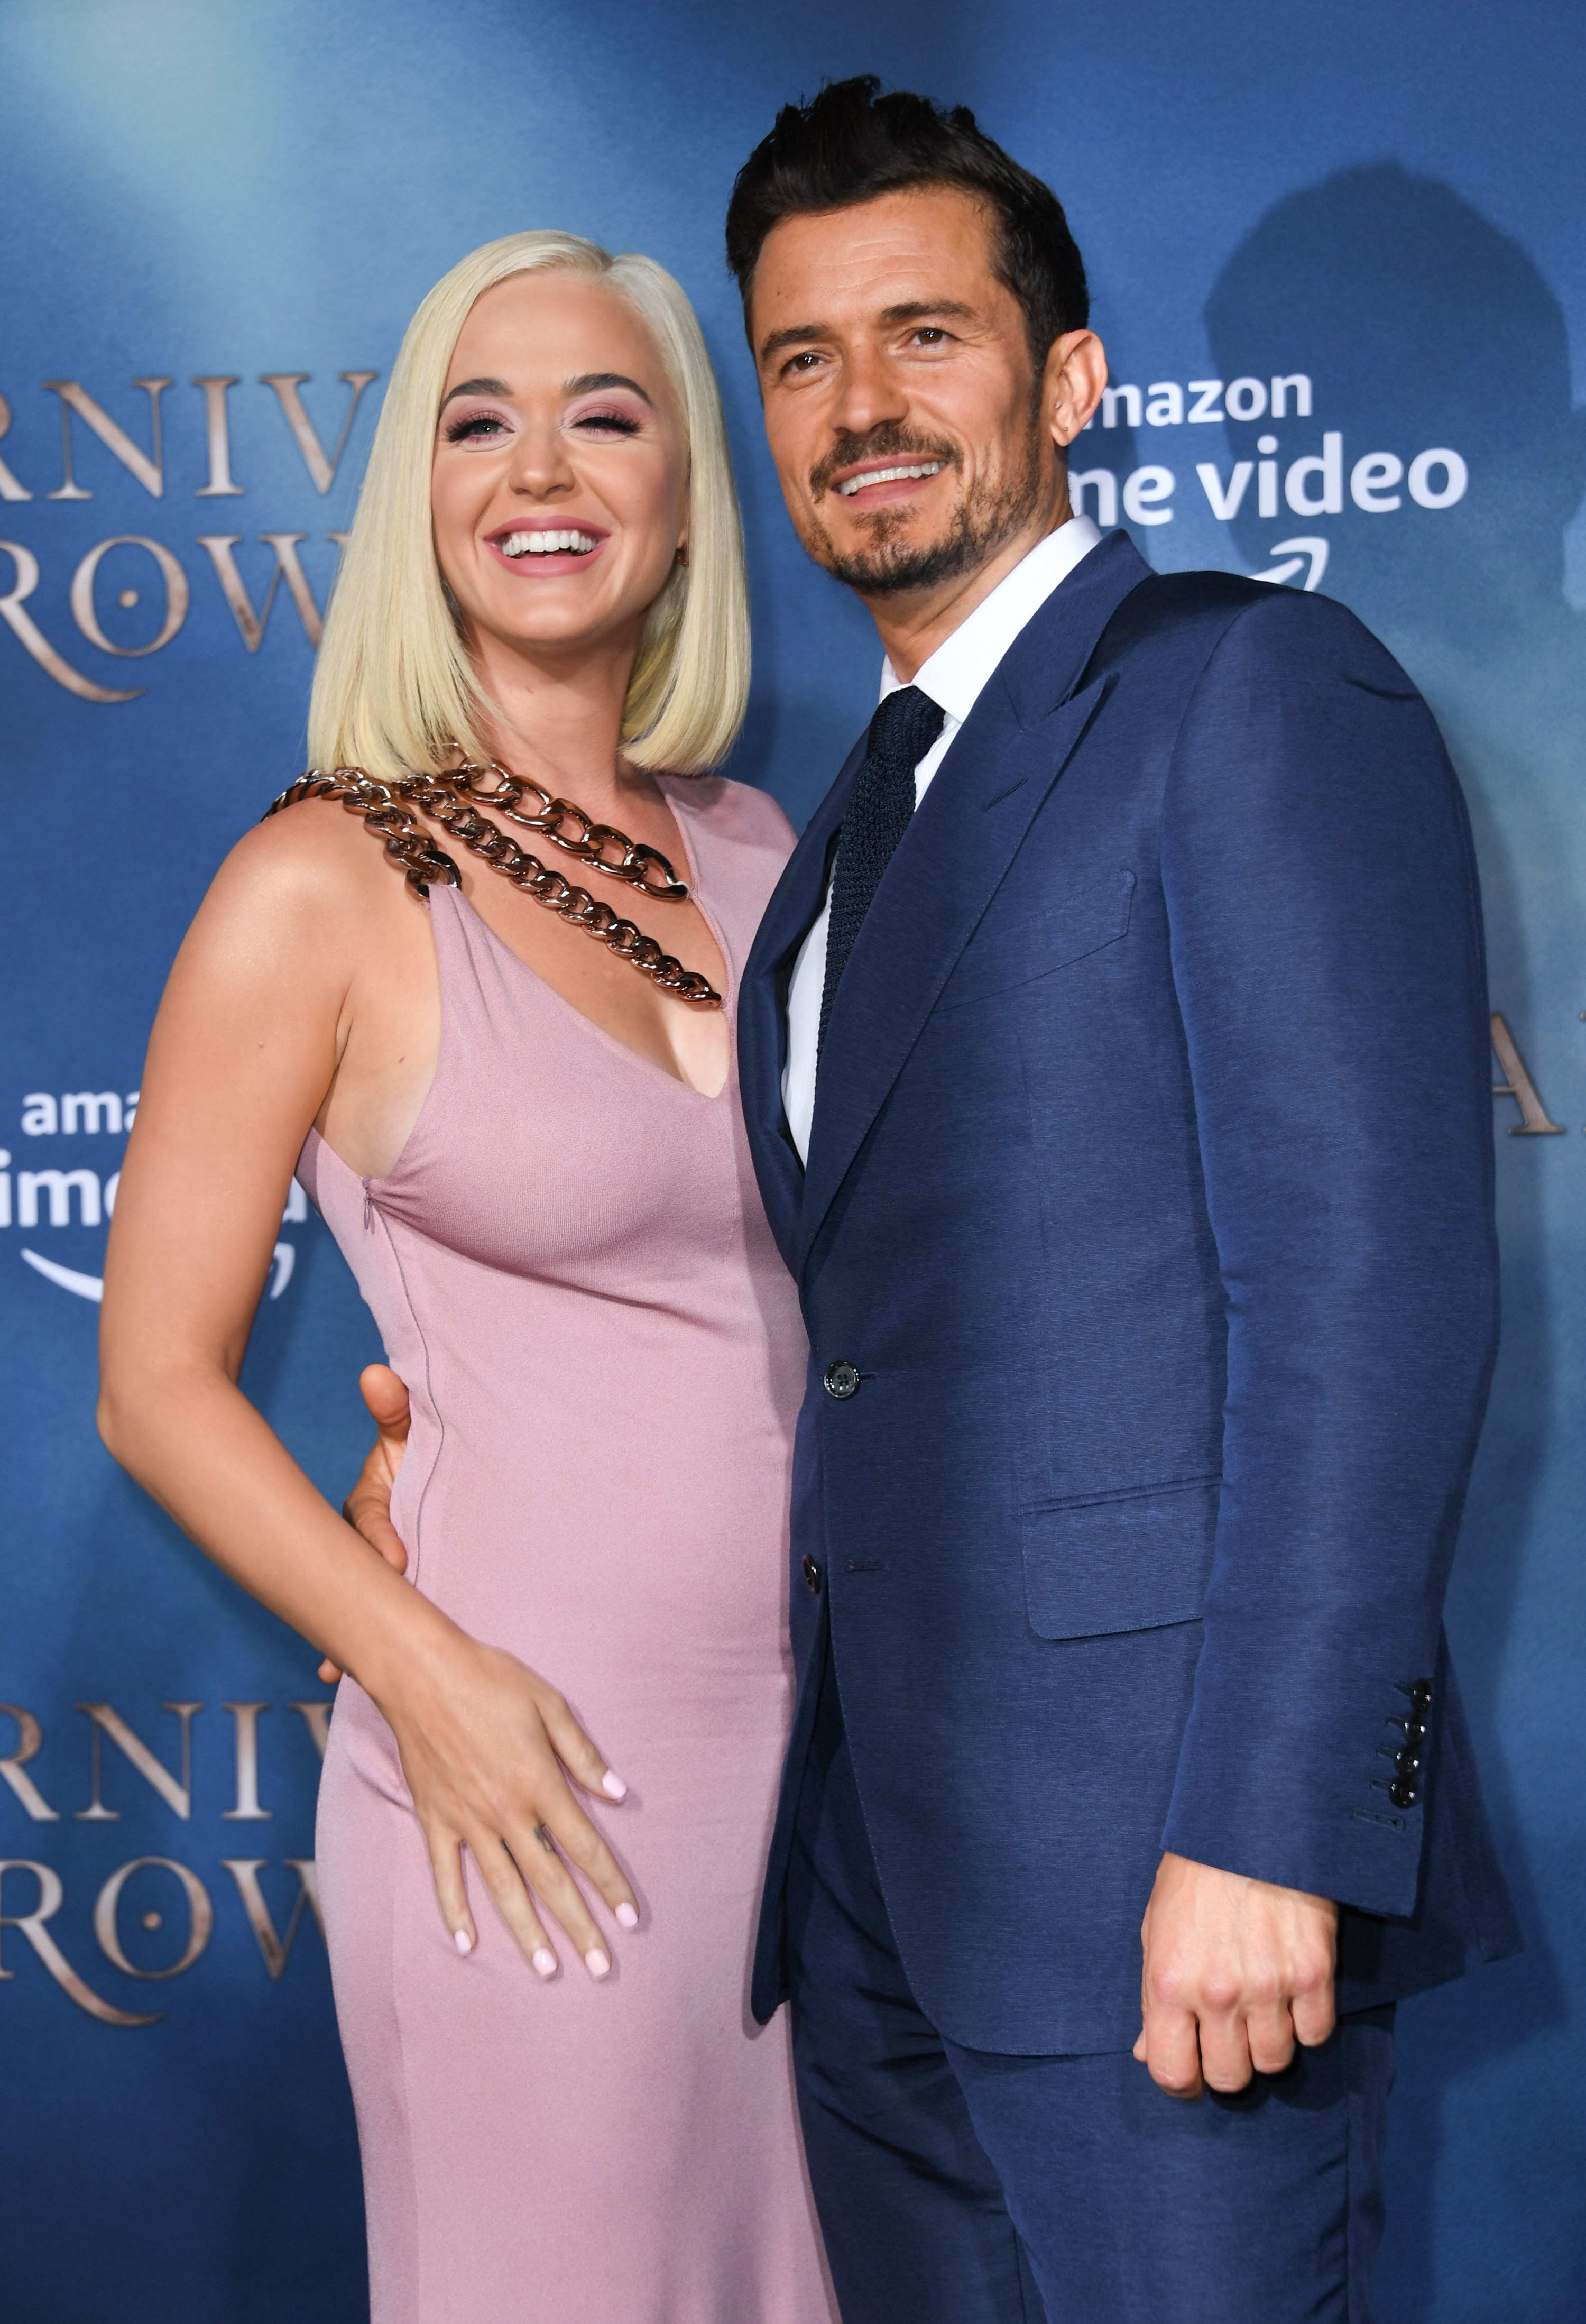 Katy and Orlando Bloom pose together at the premiere for Carnival Row back in 2019.